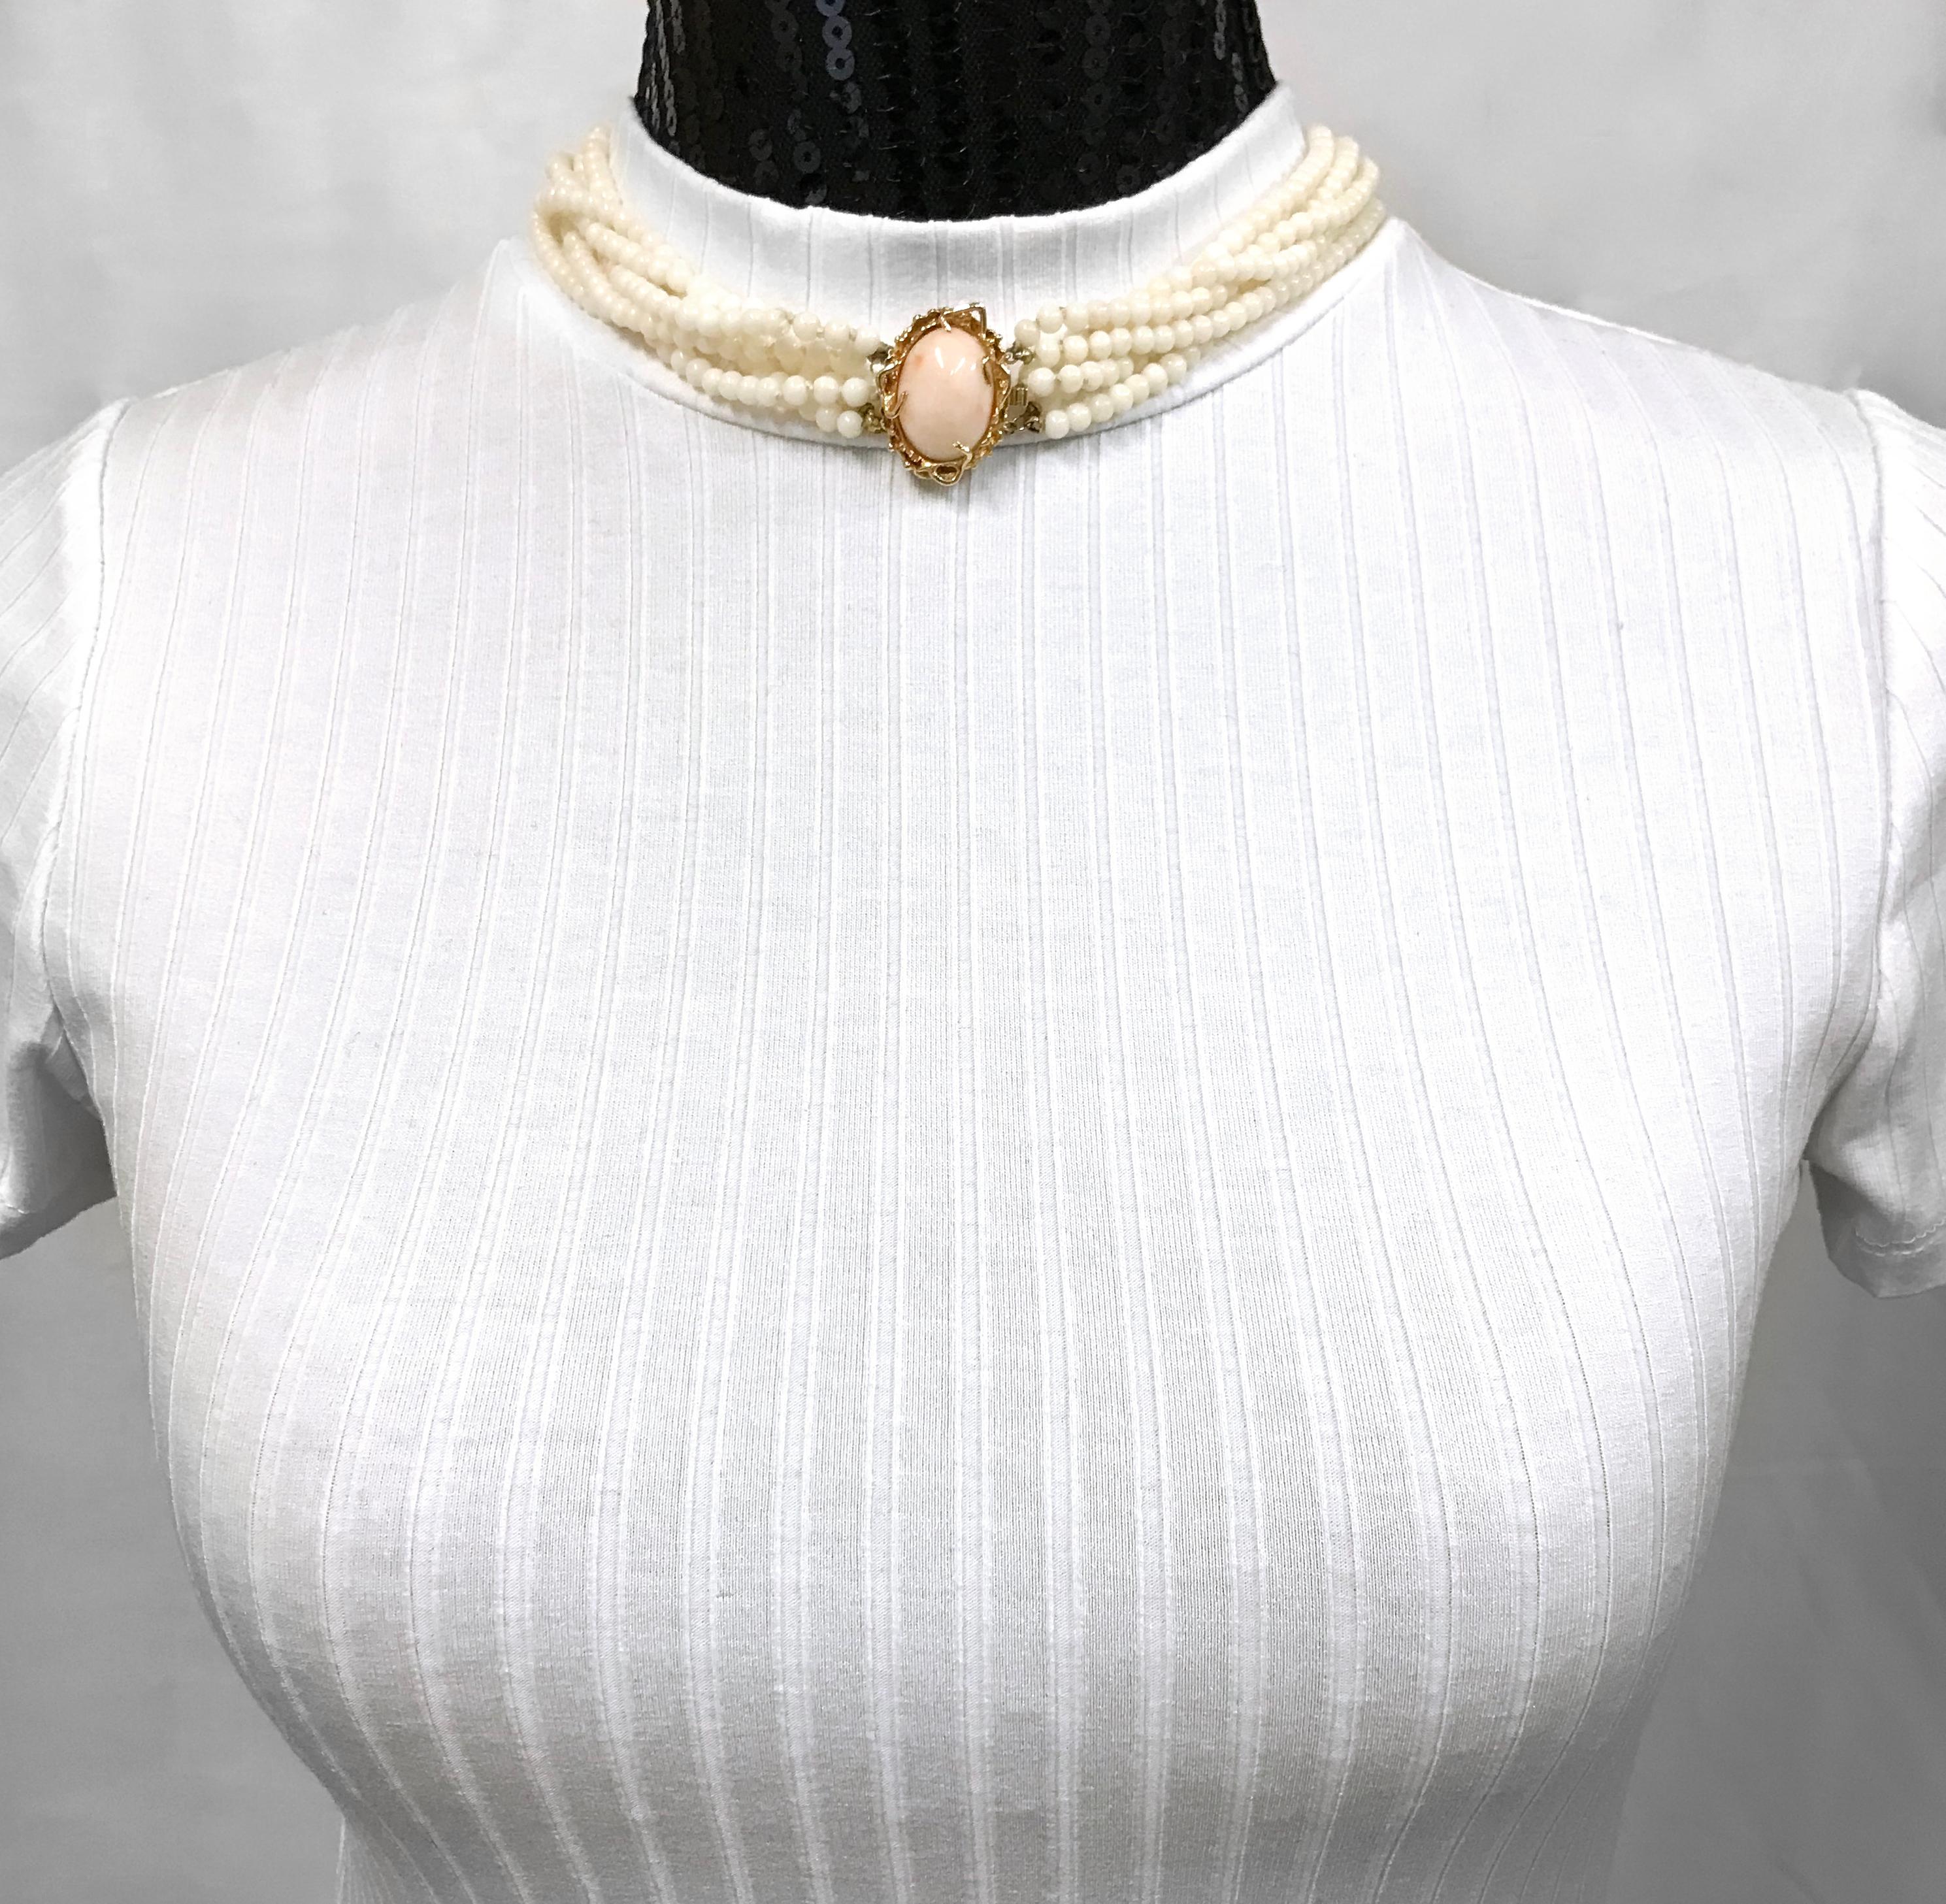 Retro Yellow Gold Angel Skin Coral Choker Necklace